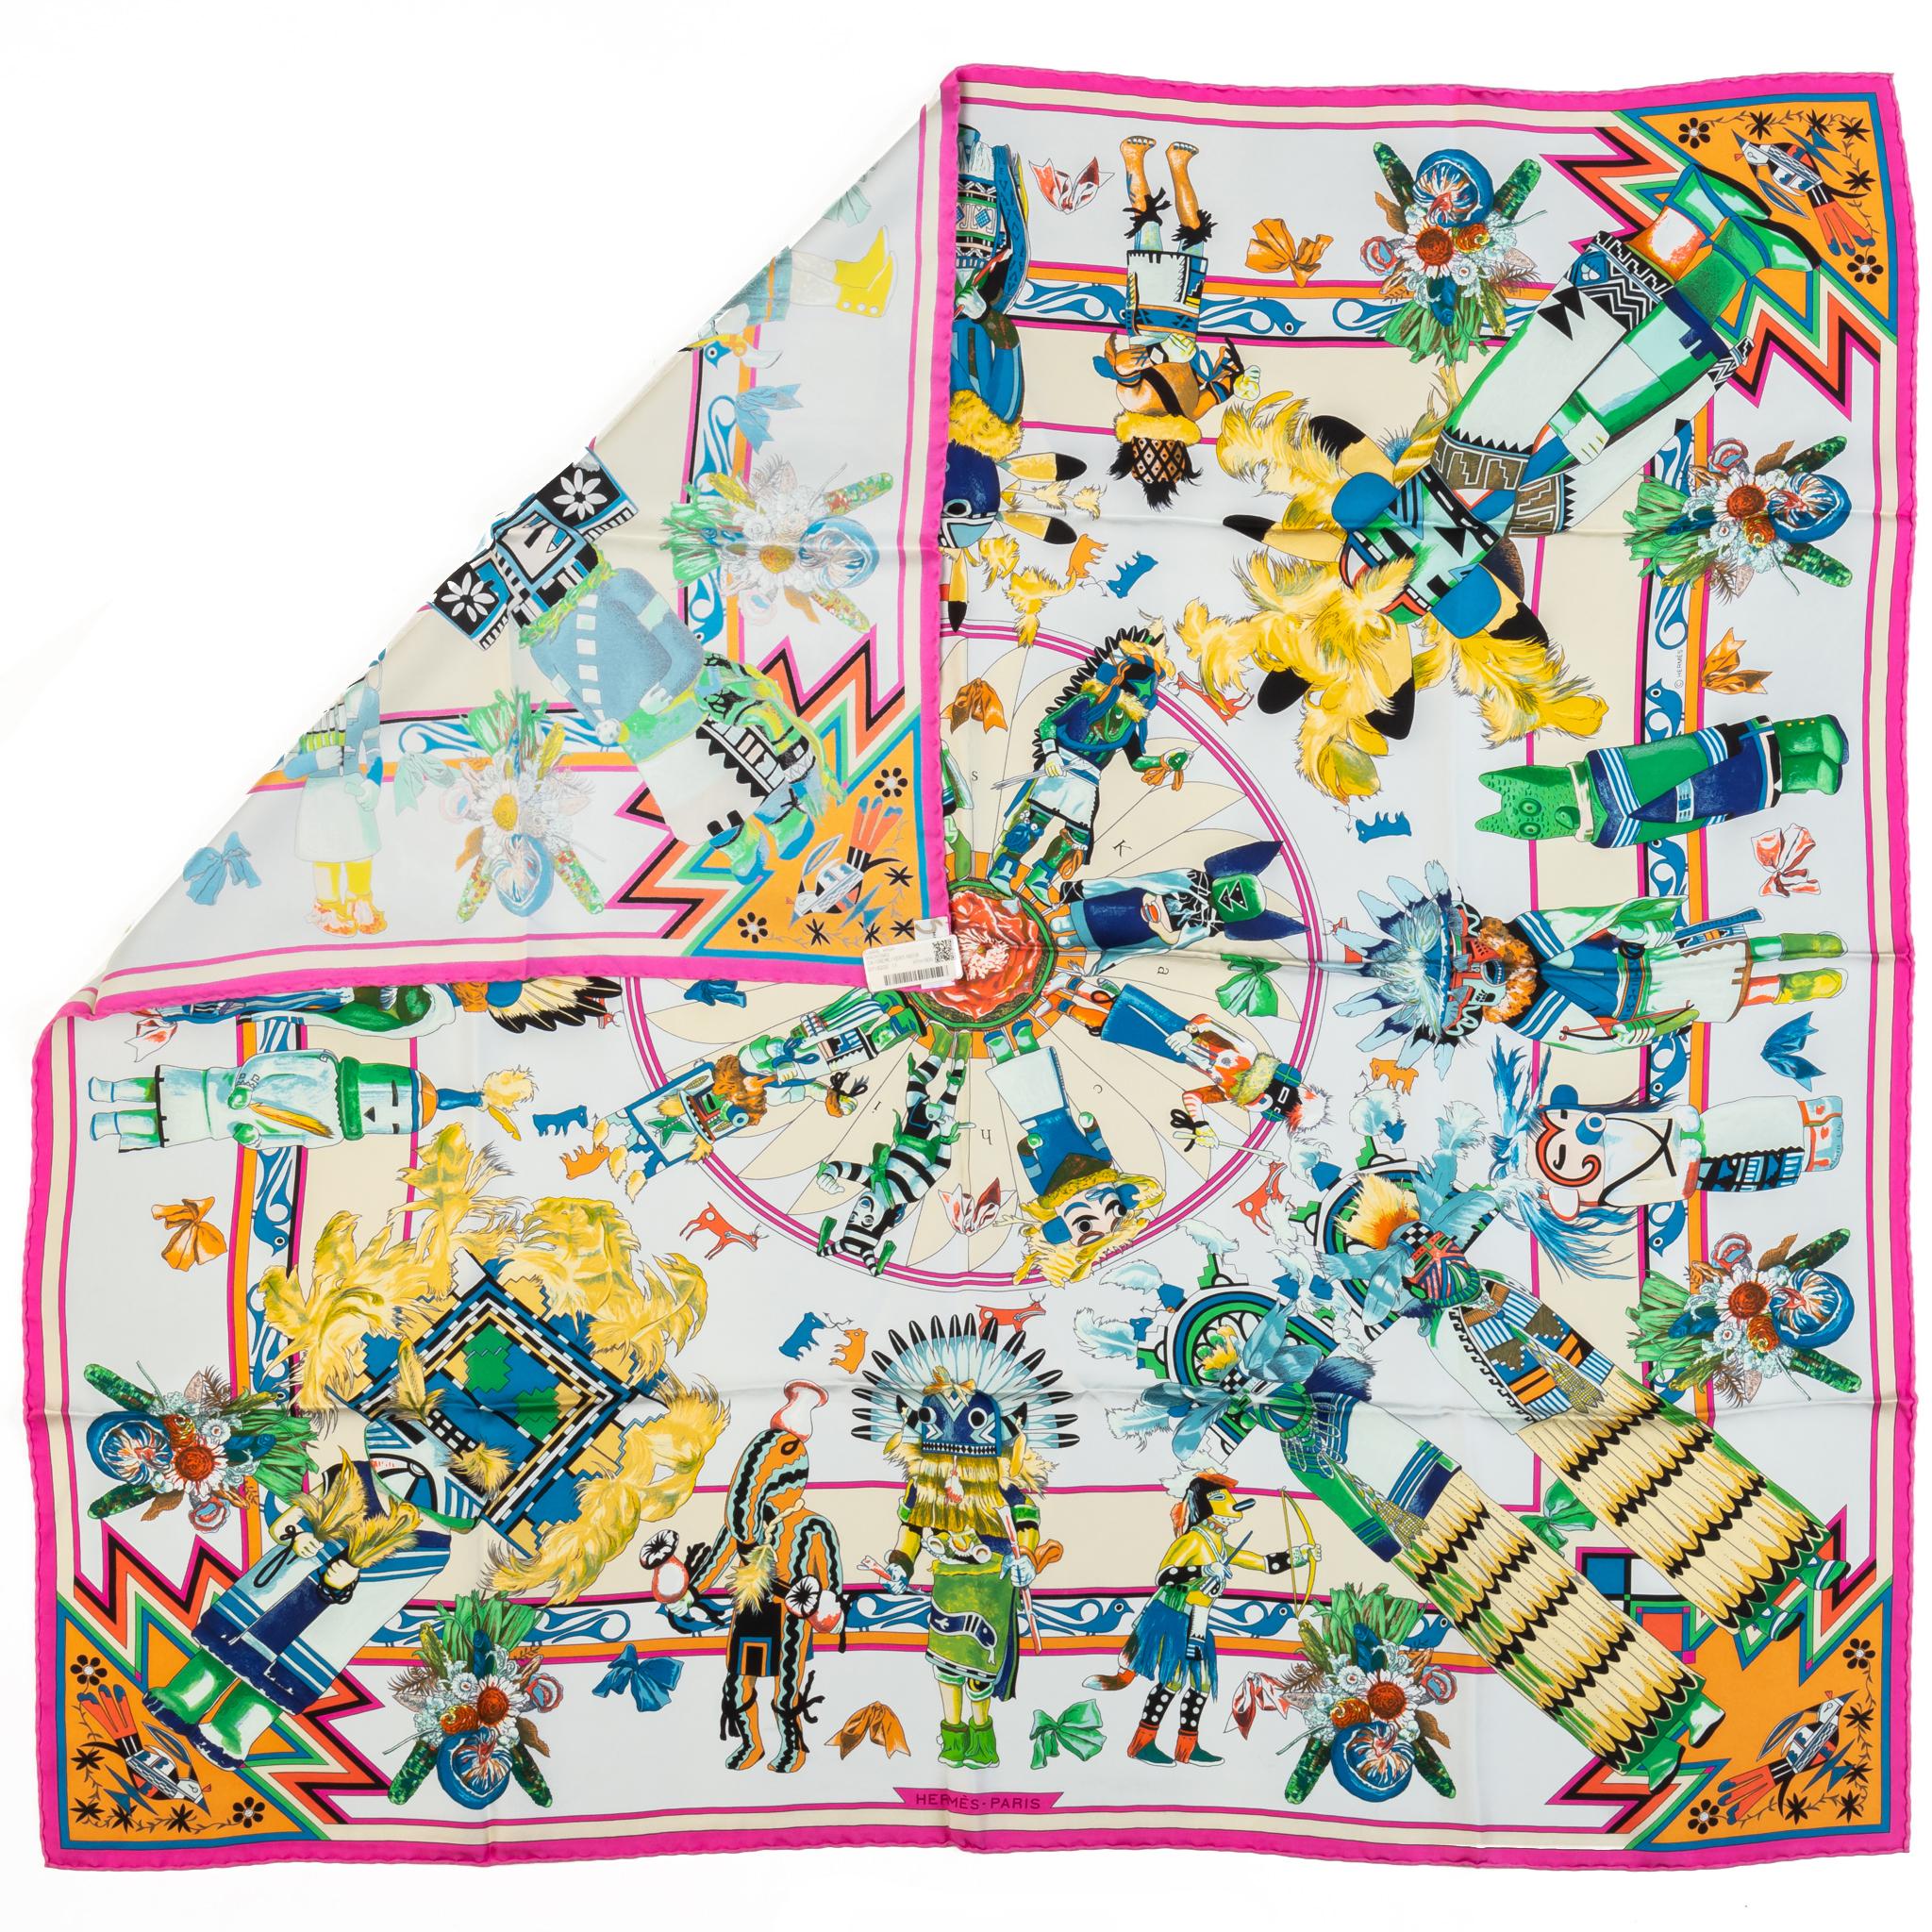 Signature Hermès silk twill Kachinas scarf designed by Kermit Oliver. Very collectible series. Hand rolled edges in a 35